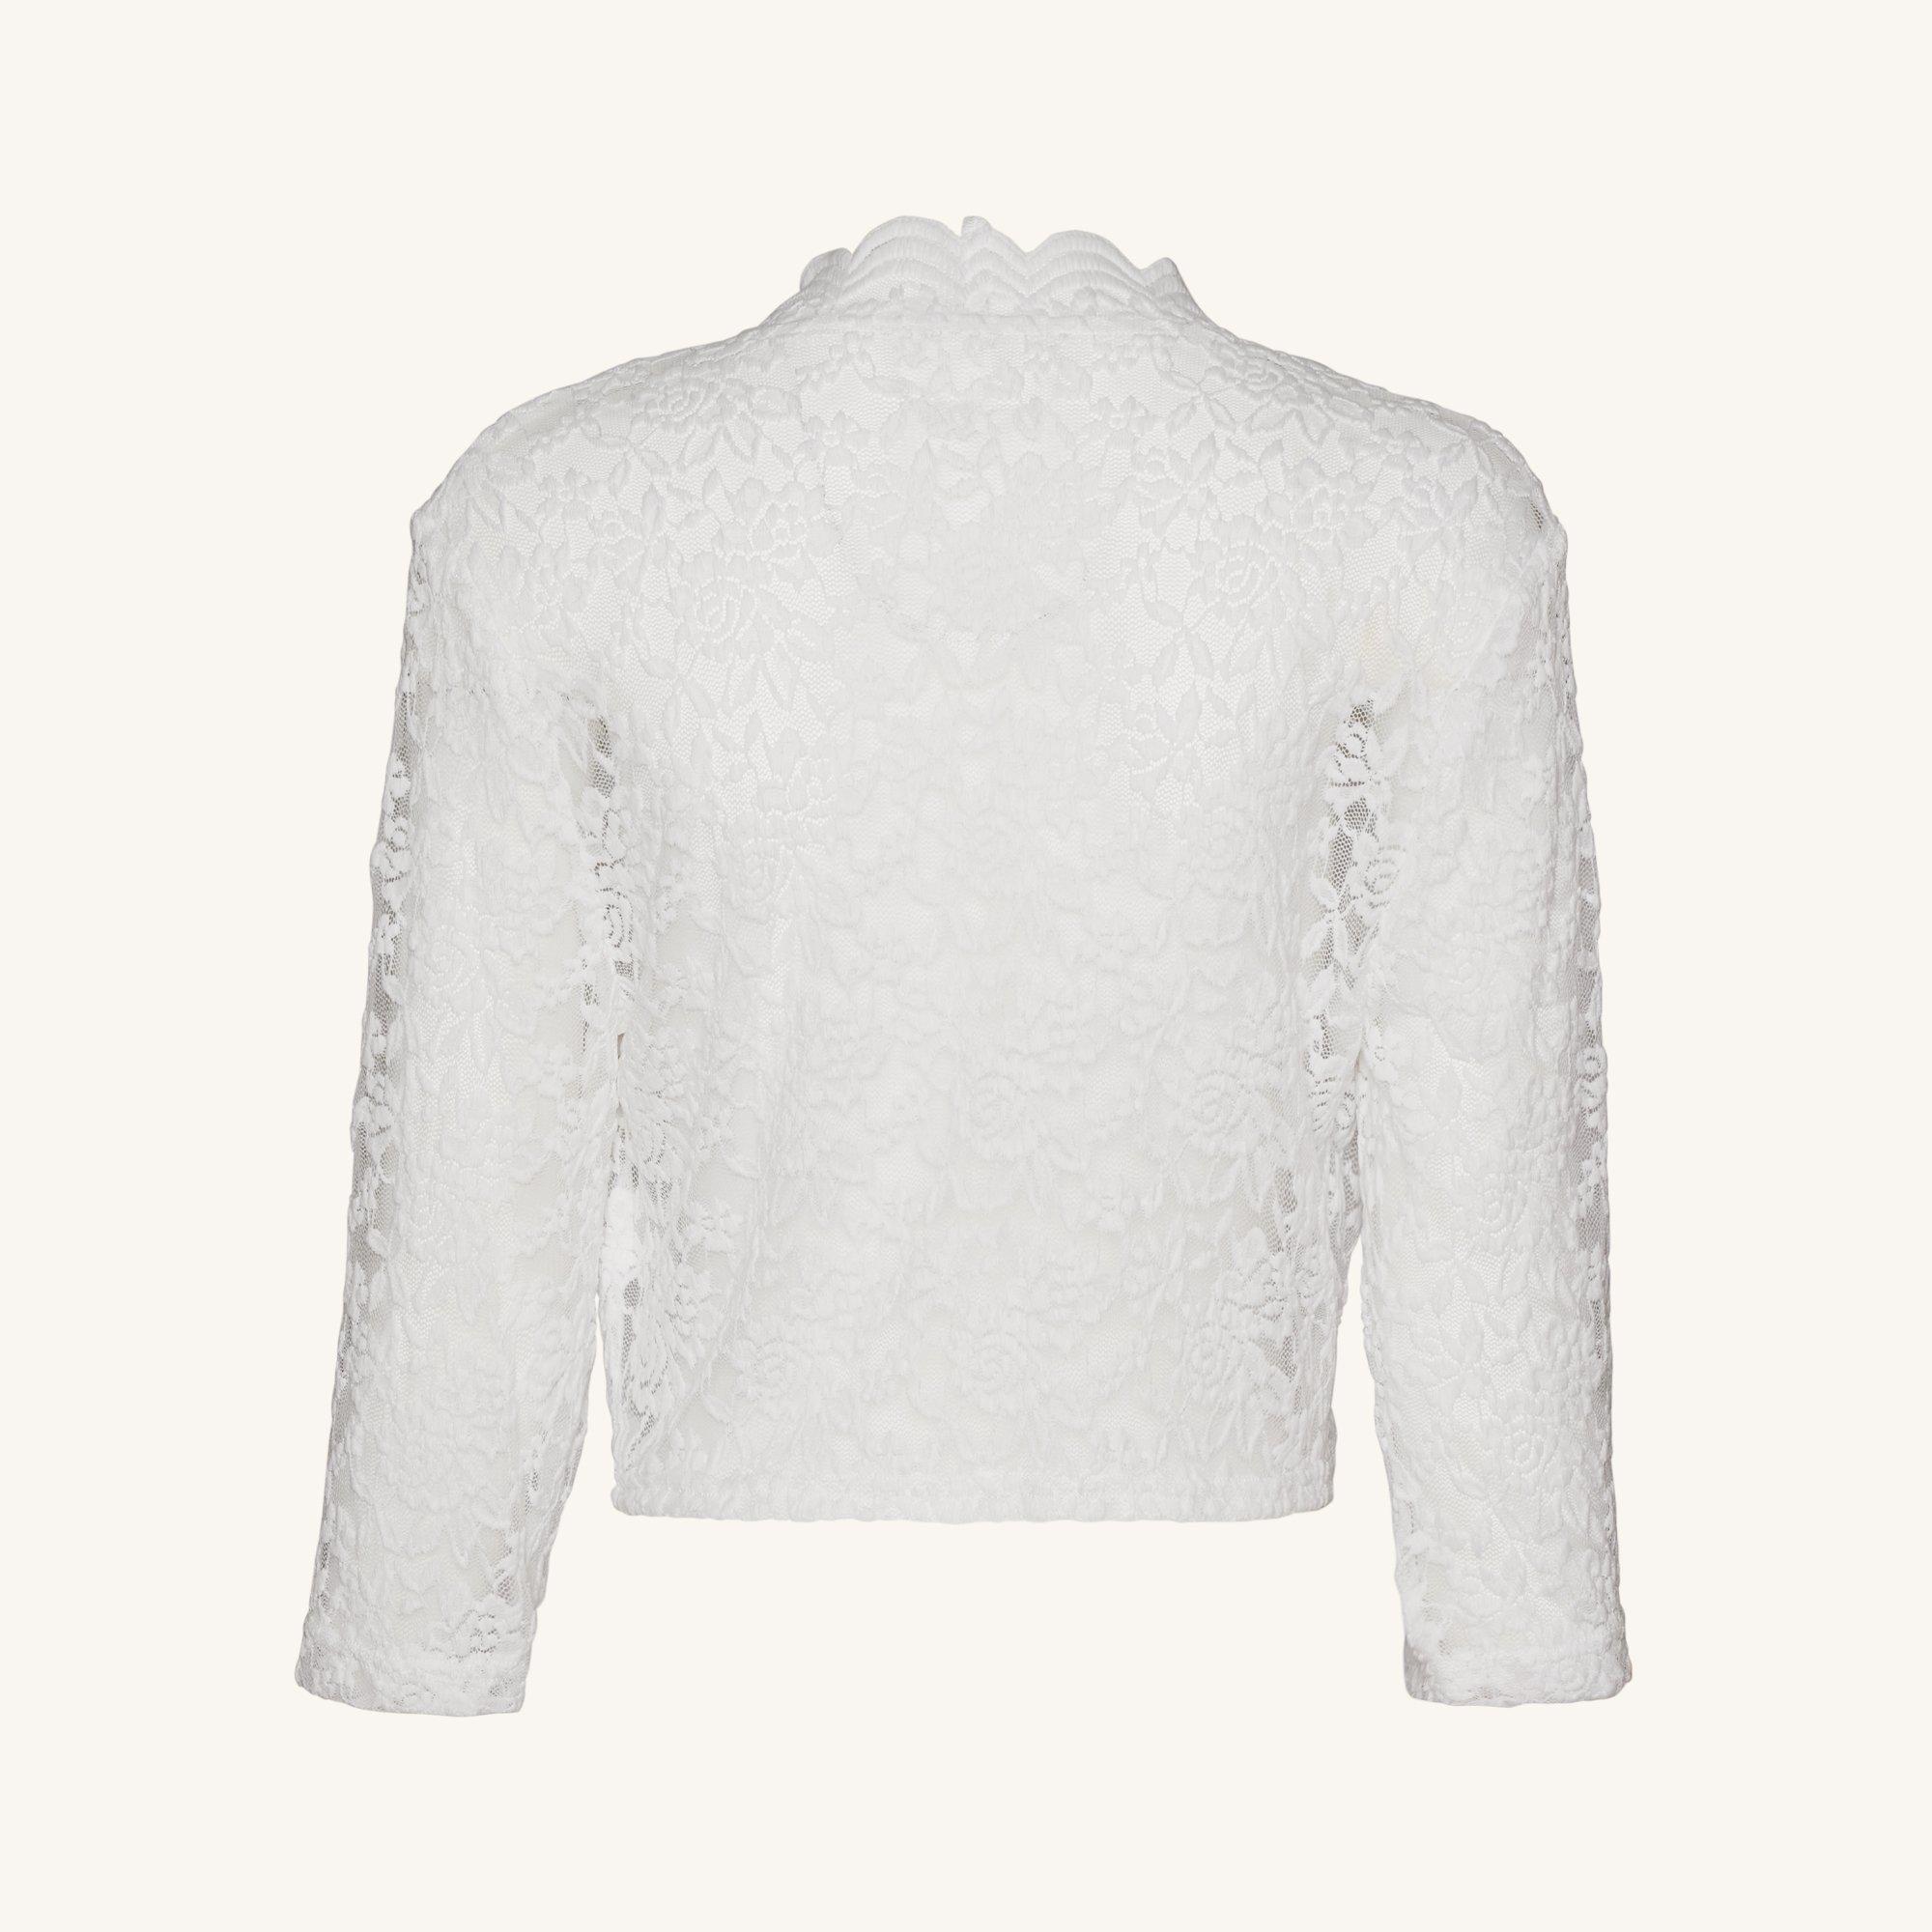 The Talula Scalloped Lace White Shrug | Connected Apparel